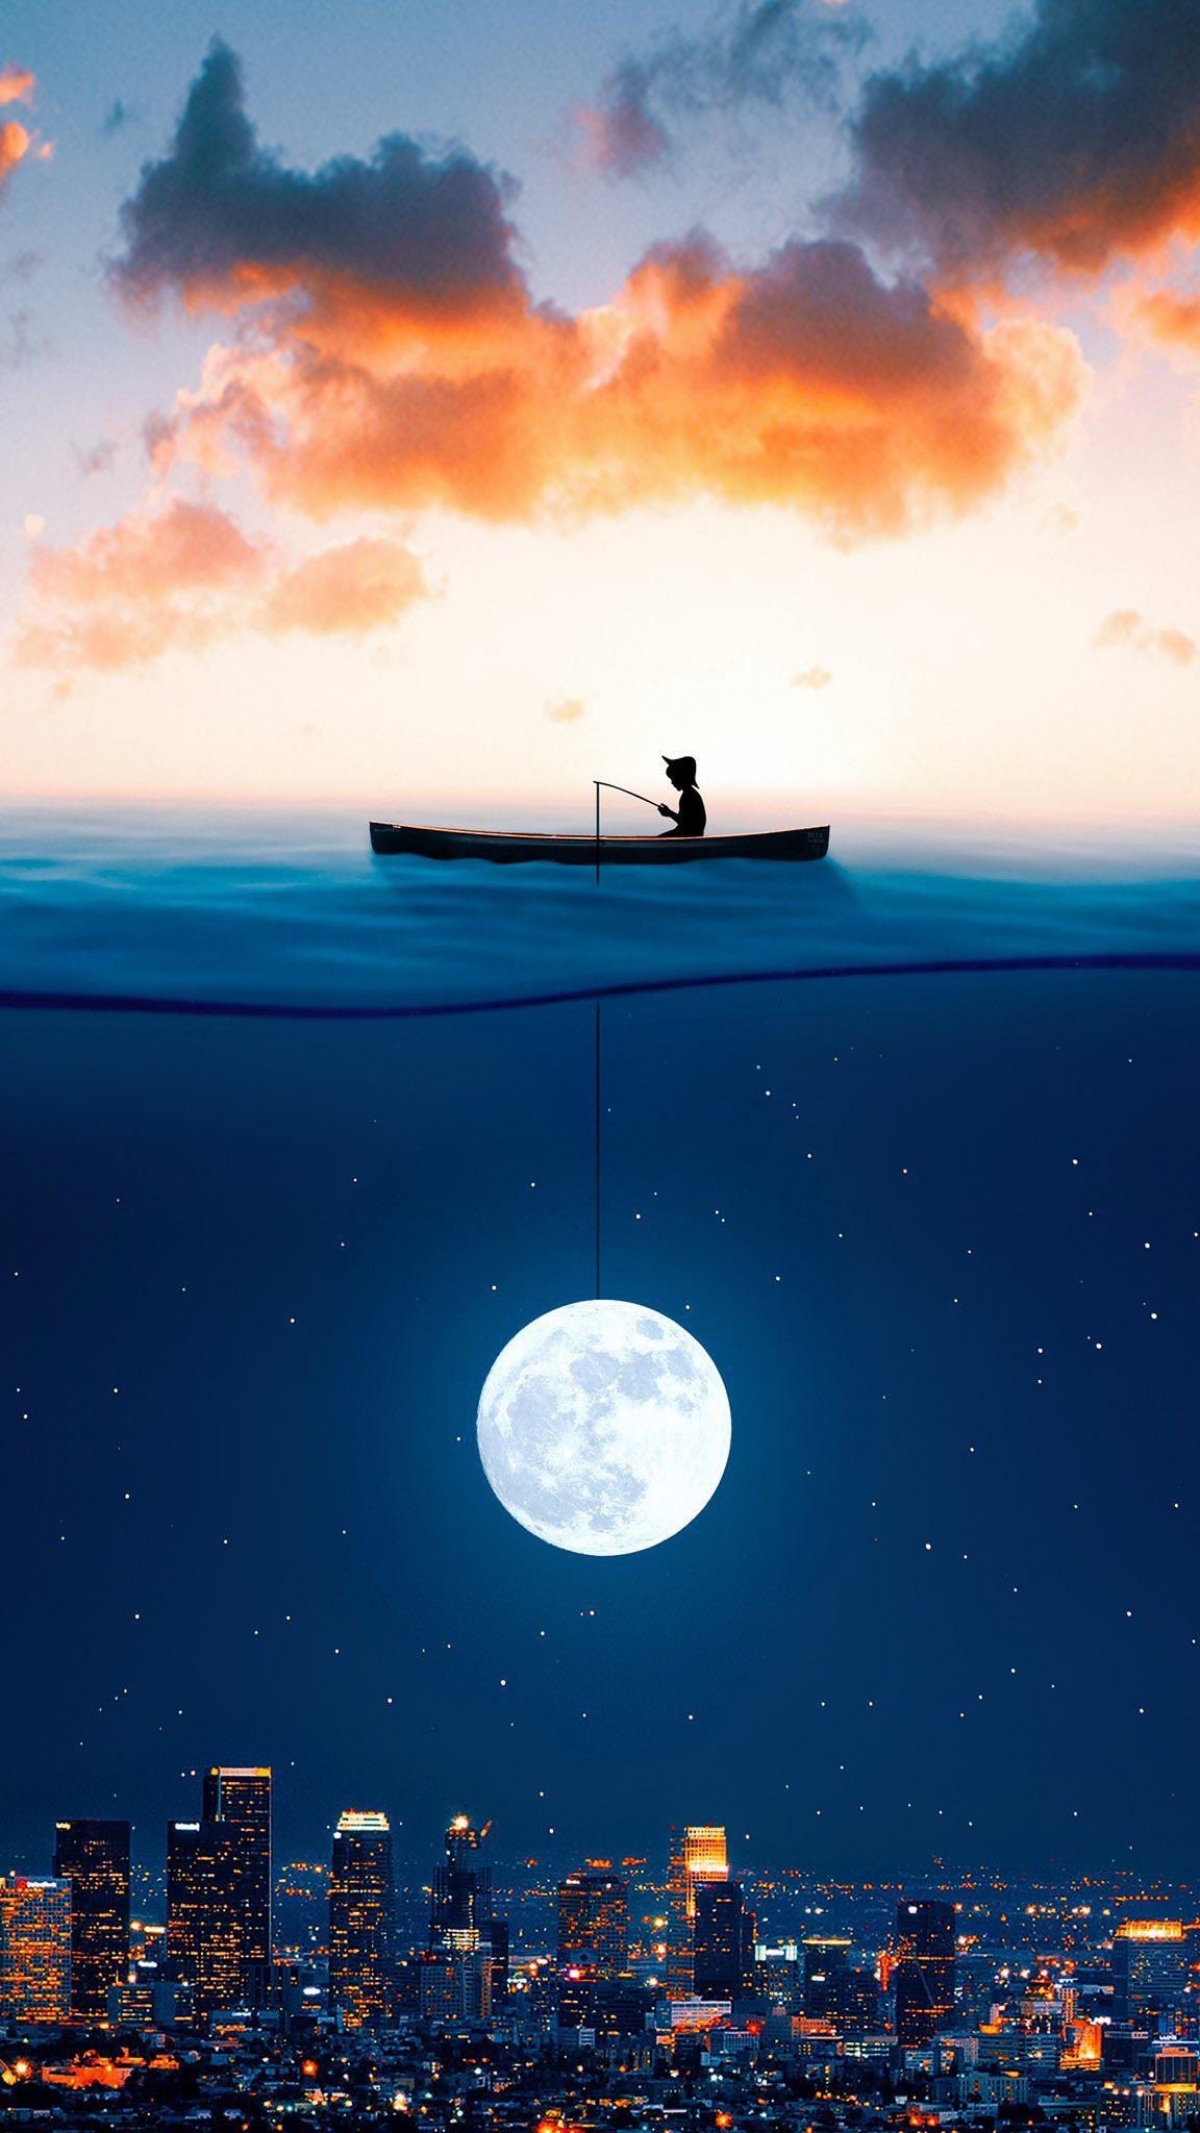 Fishing The Moon wallpaper for Apple iPhone, Mac, iPad and more